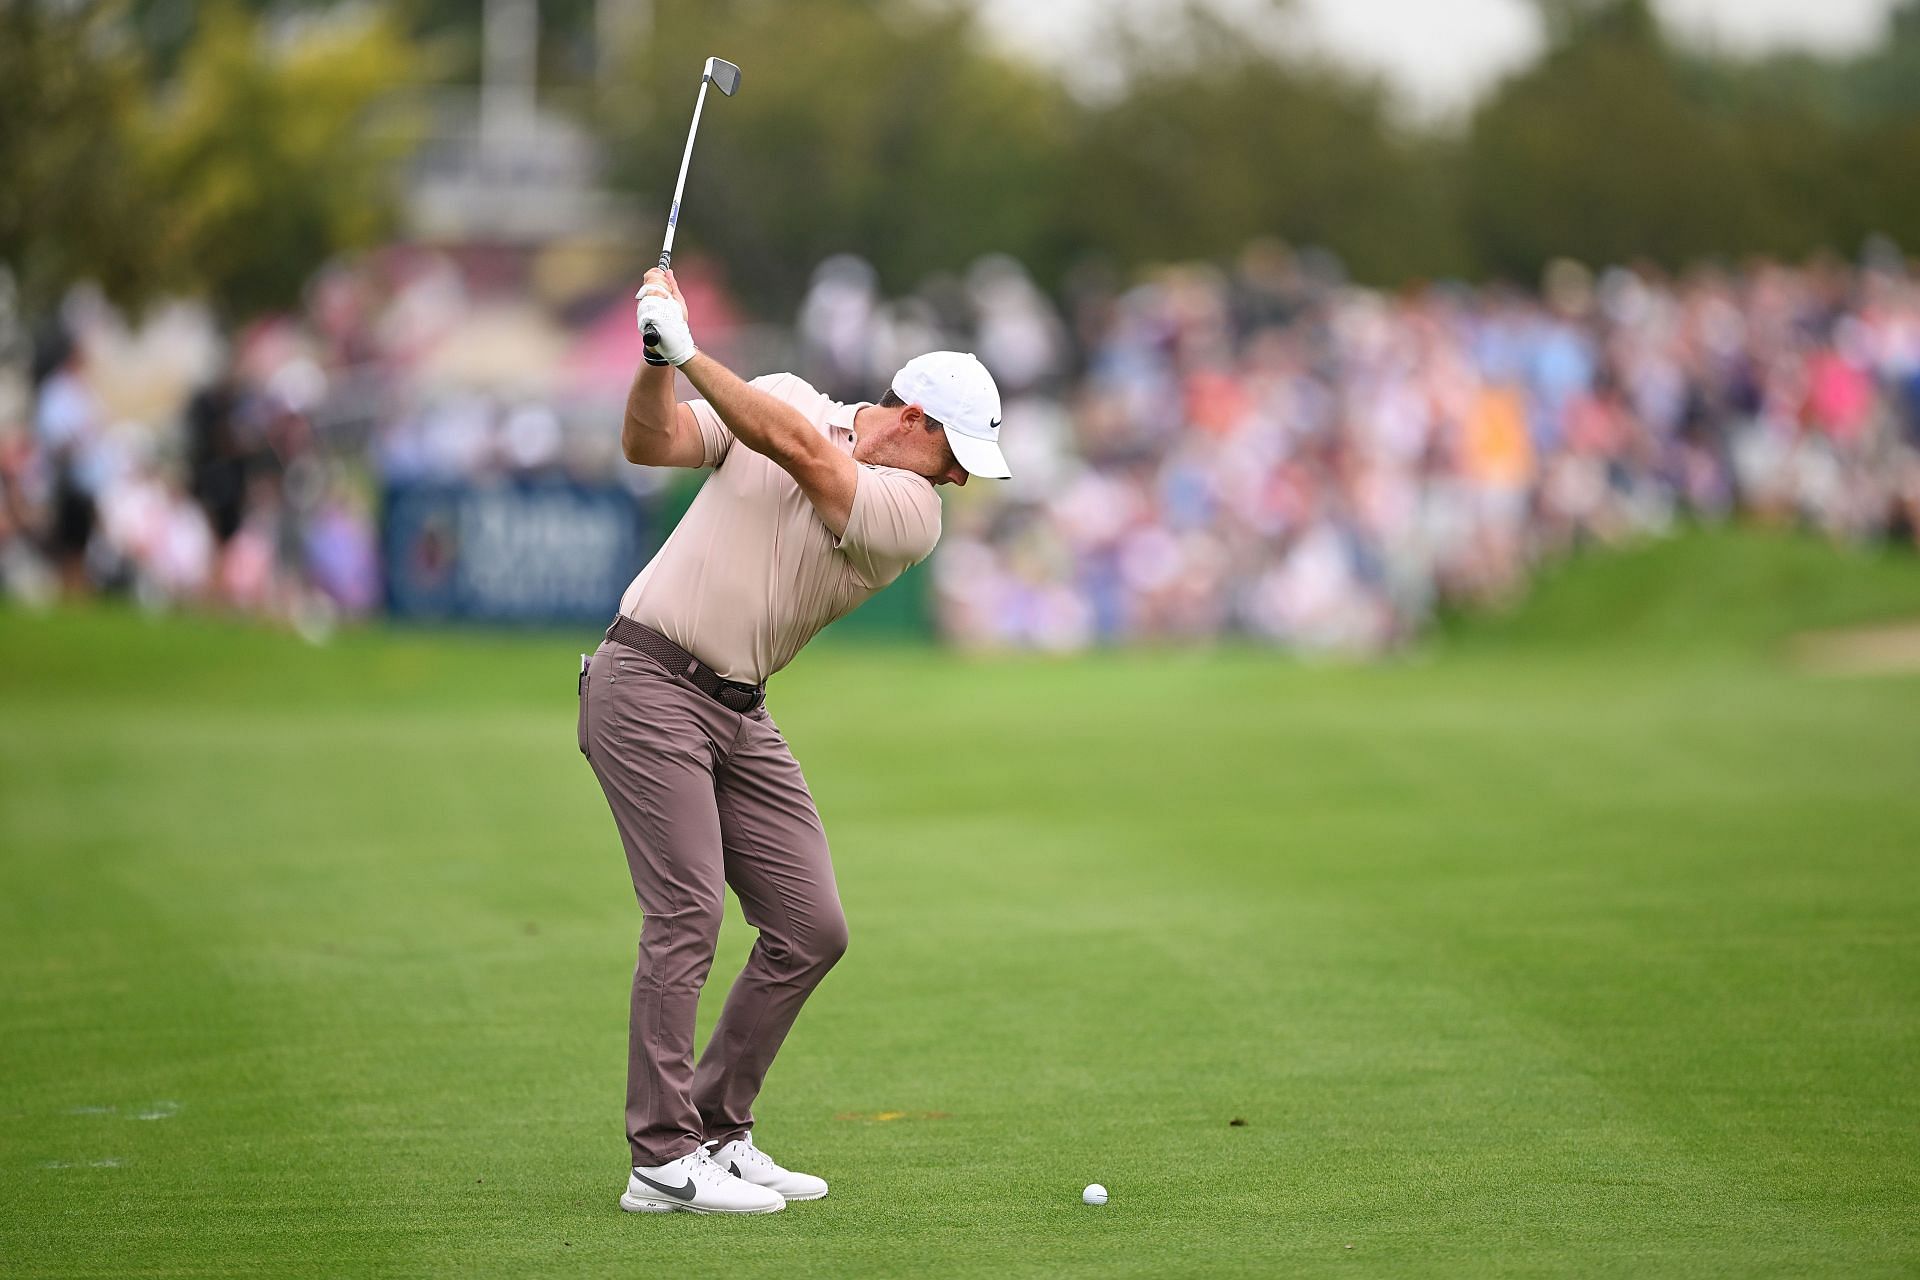 Rory Mcllroy plays a shot at the Horizon Irish Open - Day One (Image via Getty)